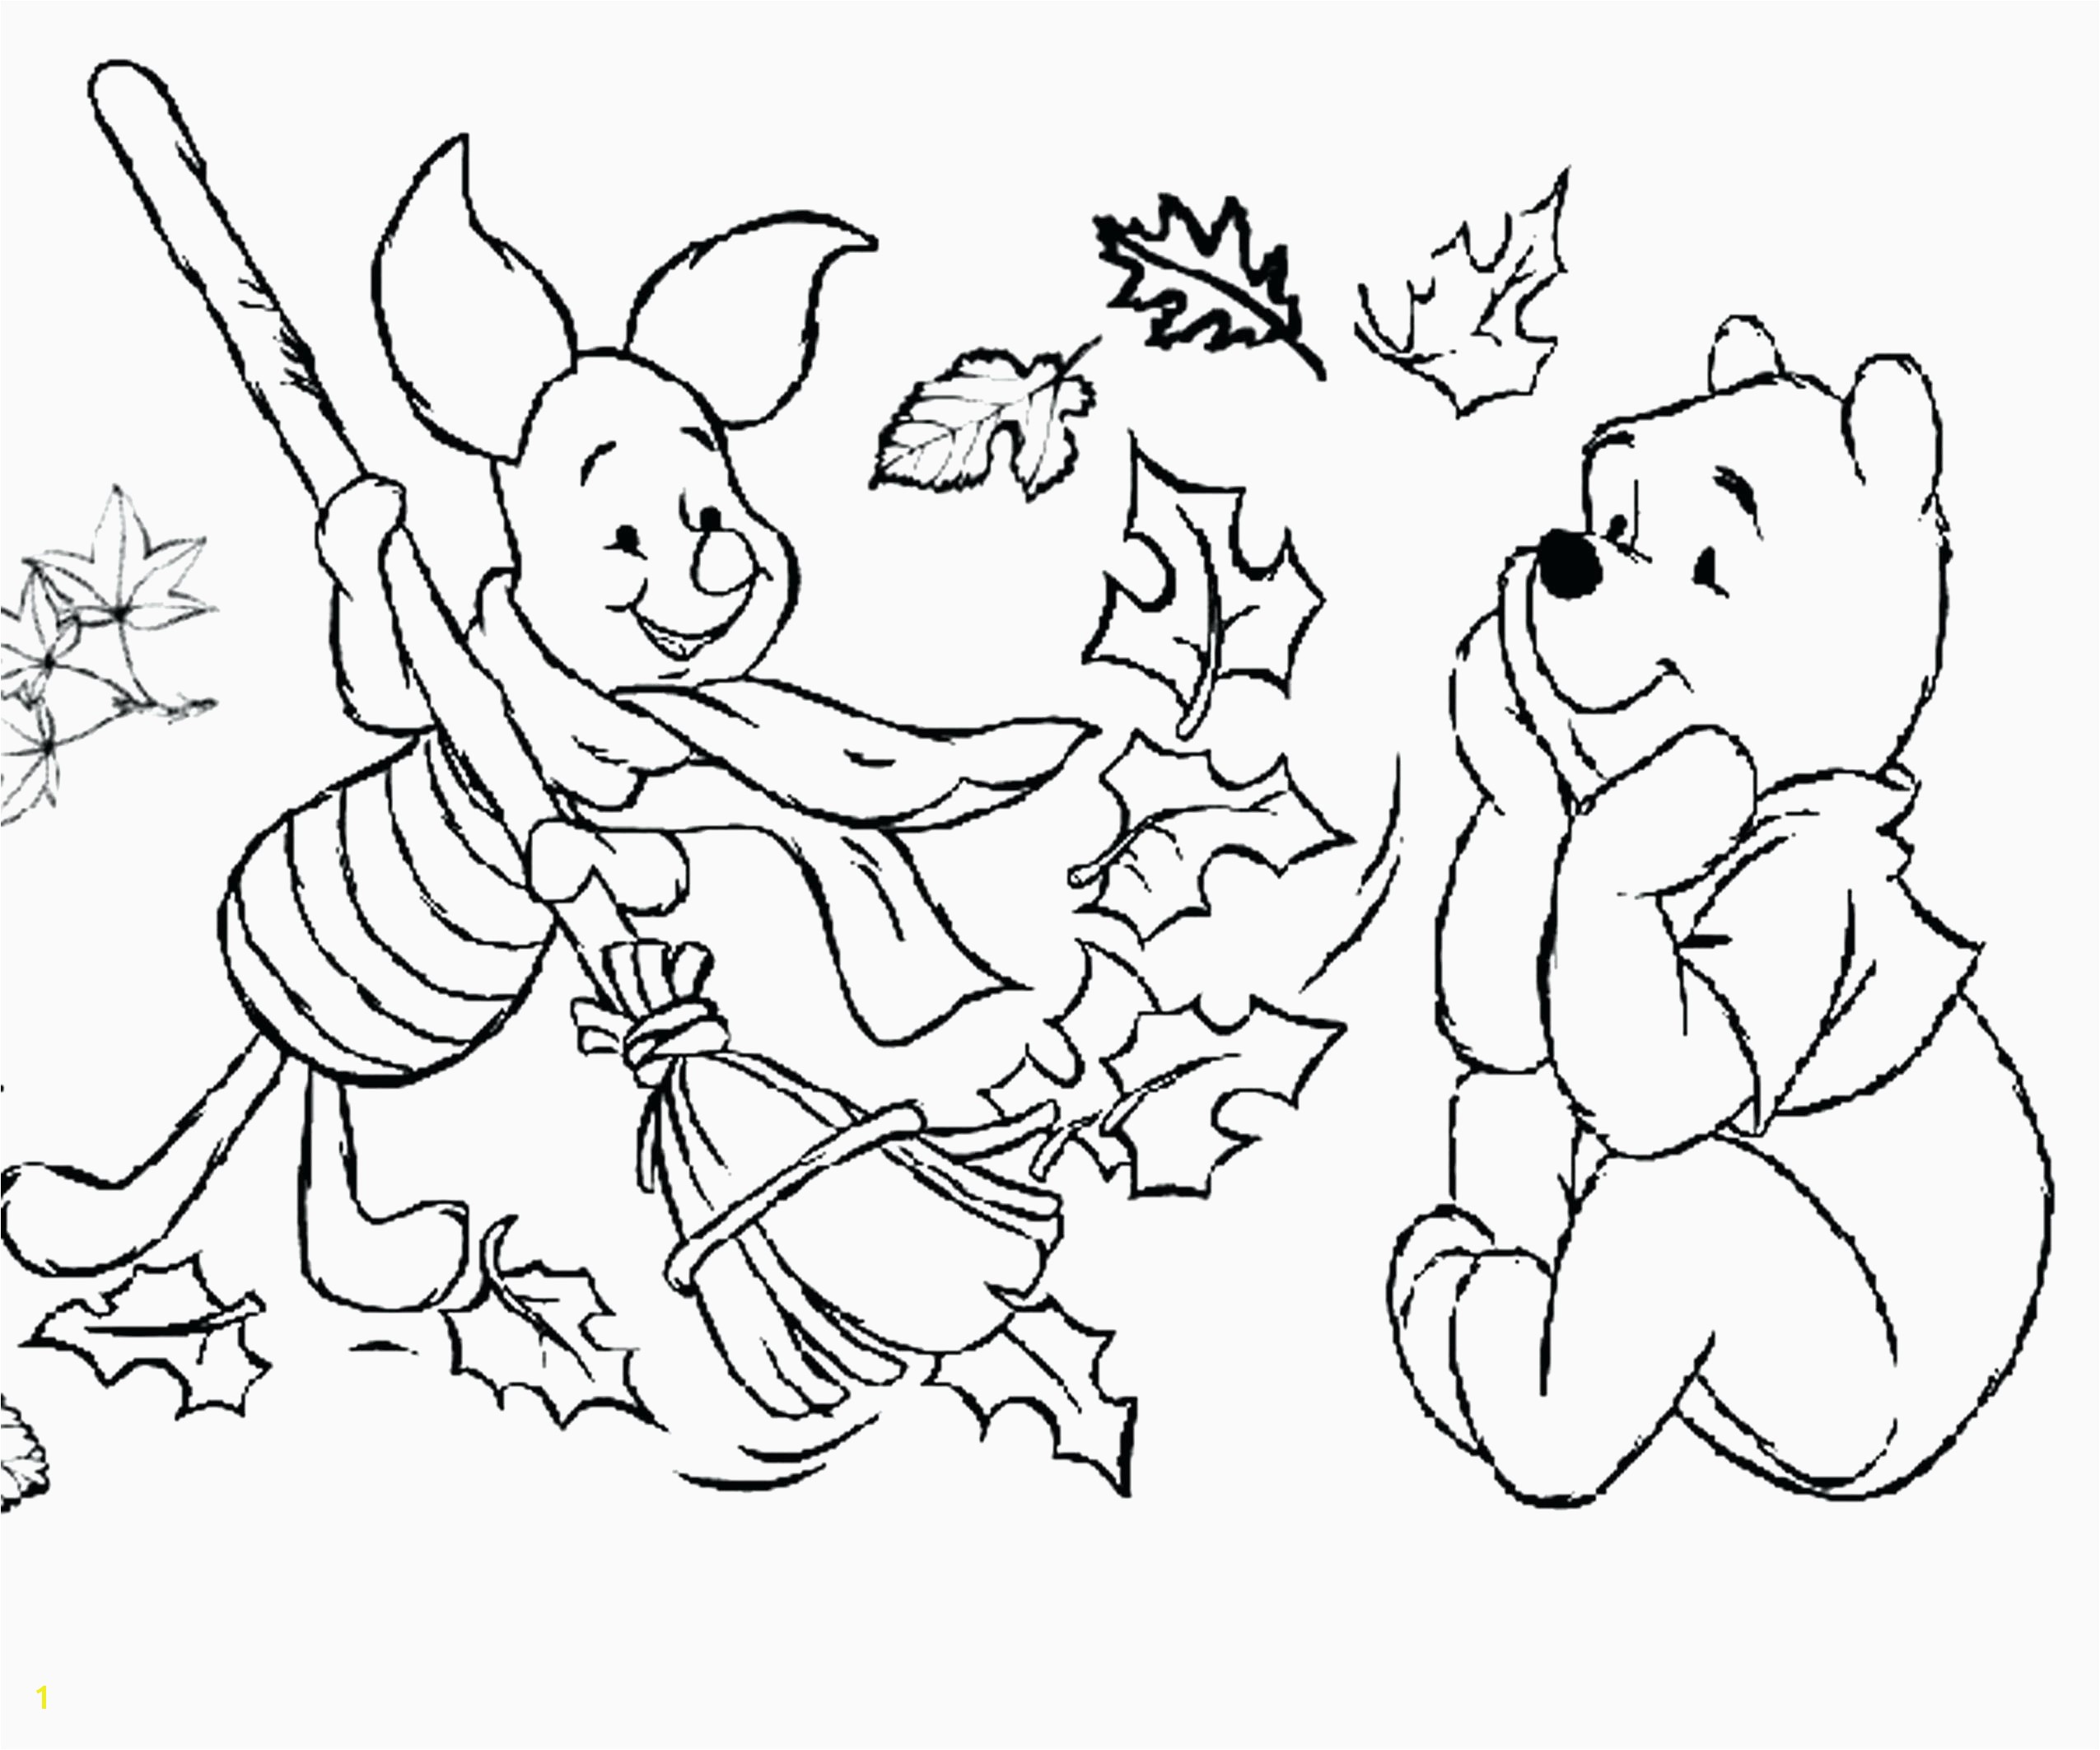 Coloring Book Pages Of Babies Best Child Coloring Sheet Gallery